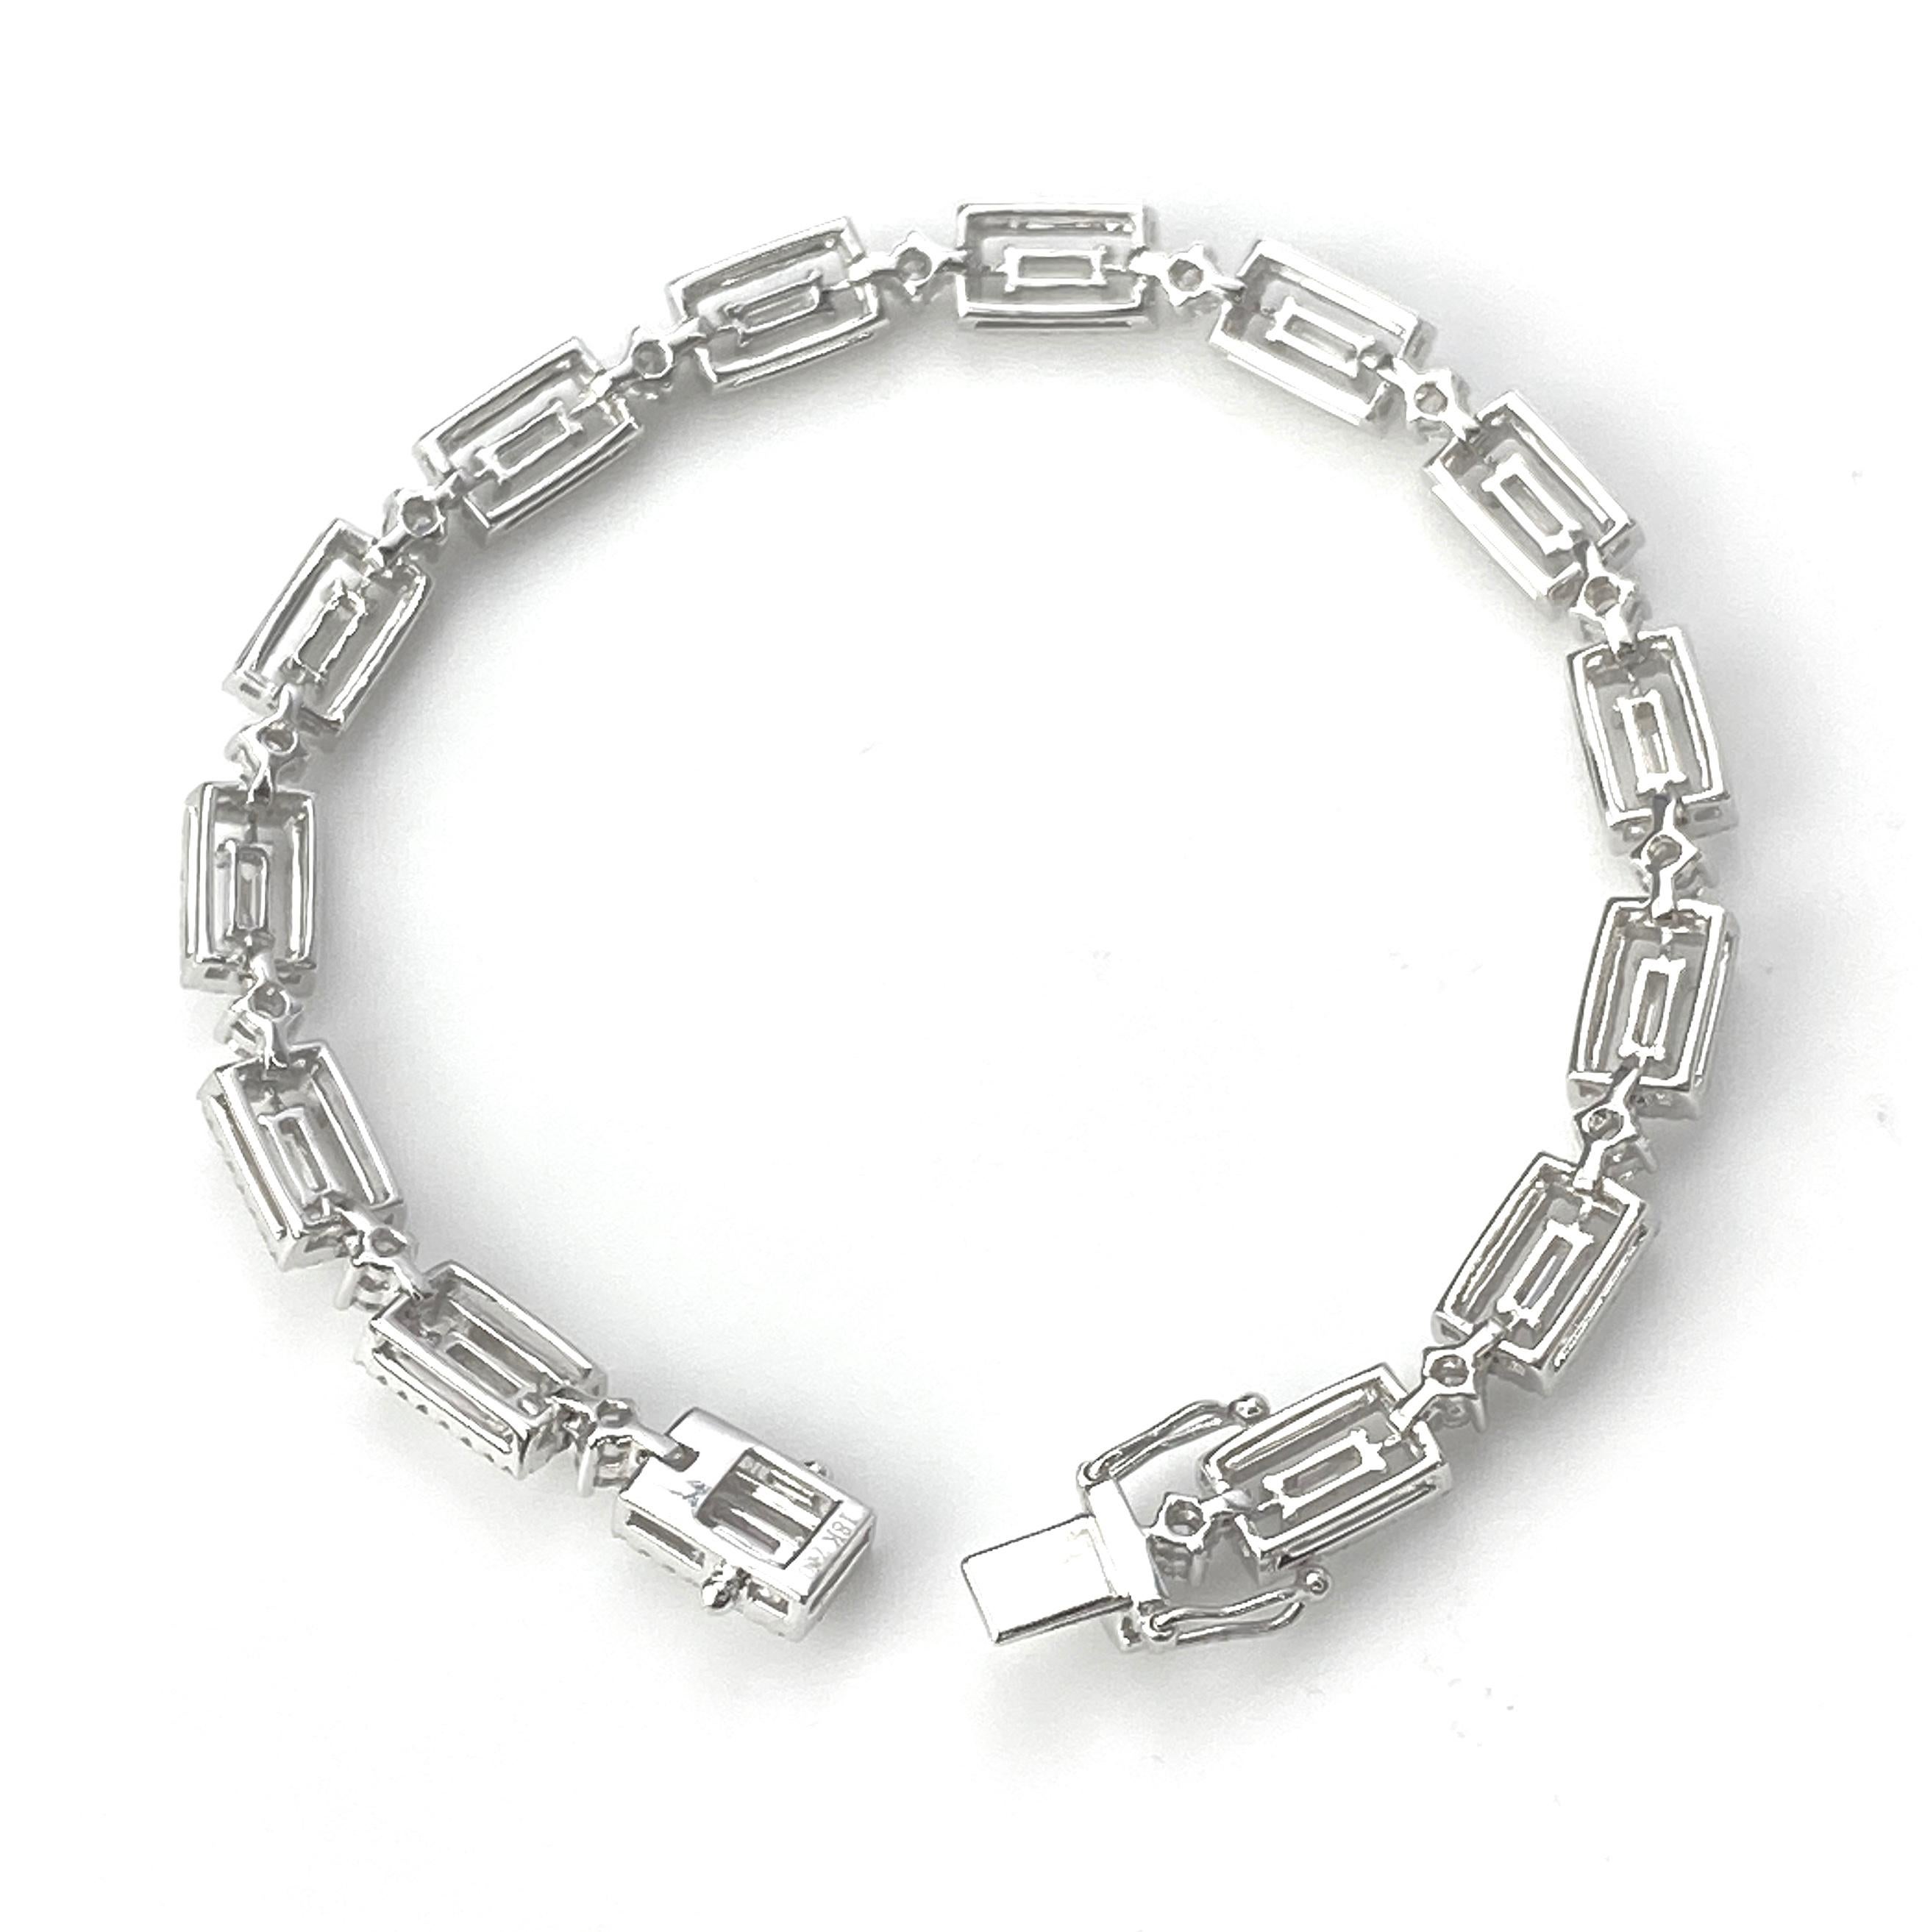 Art Deco Style Baguette Diamond White Gold Bracelet with Round Diamond Details In New Condition For Sale In Toronto, Ontario